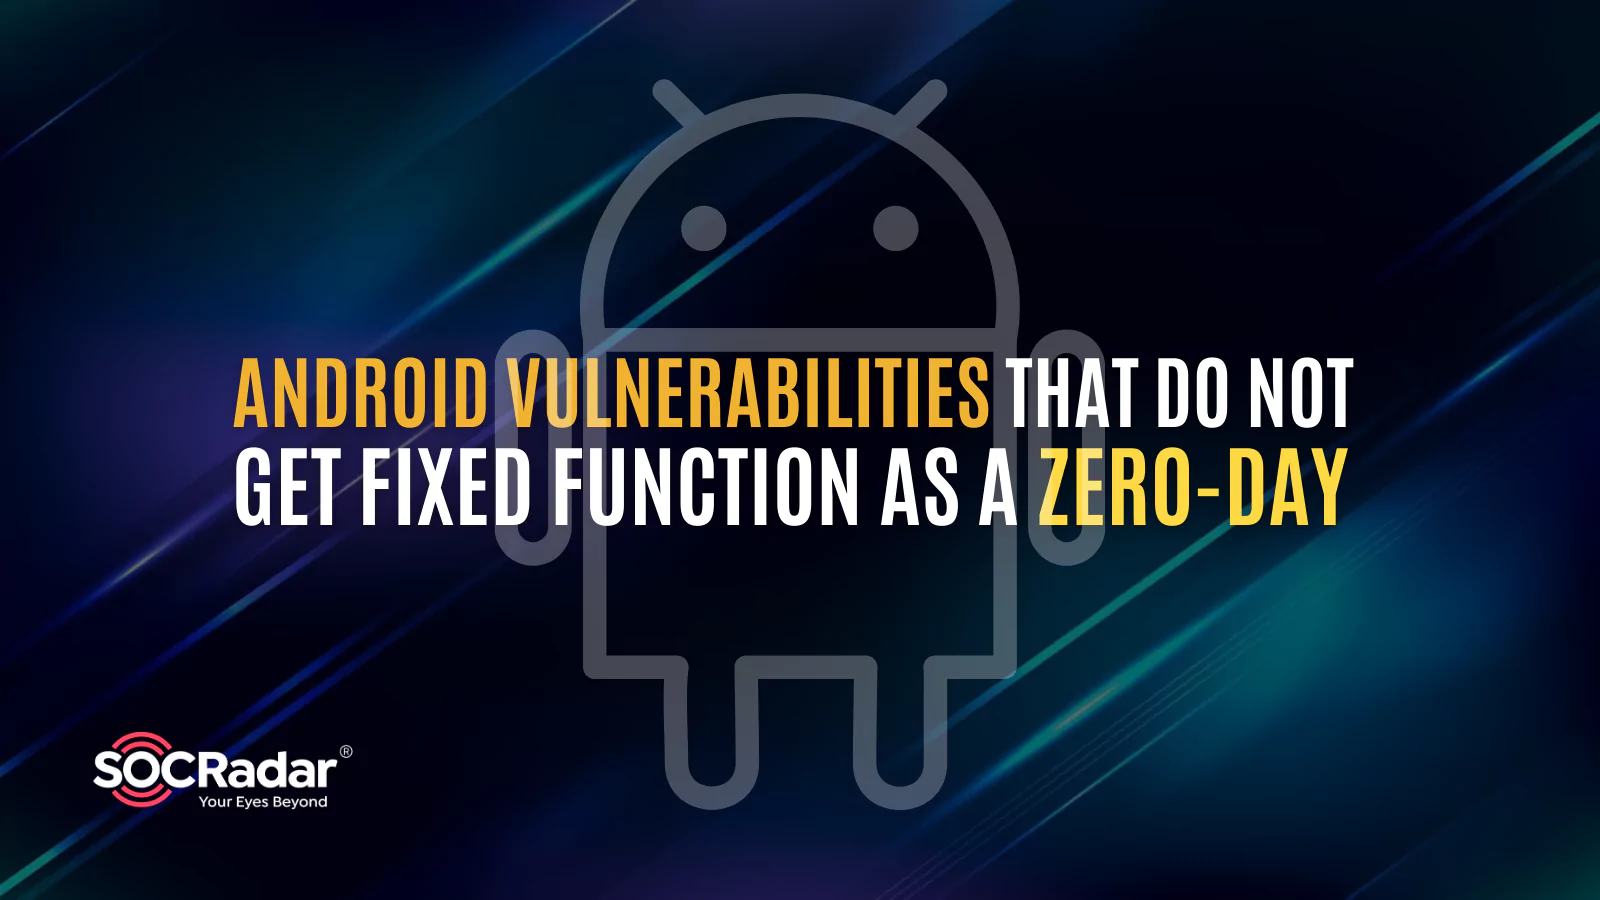 SOCRadar® Cyber Intelligence Inc. | Android Vulnerabilities That Do Not Get Fixed Function as a Zero-Day